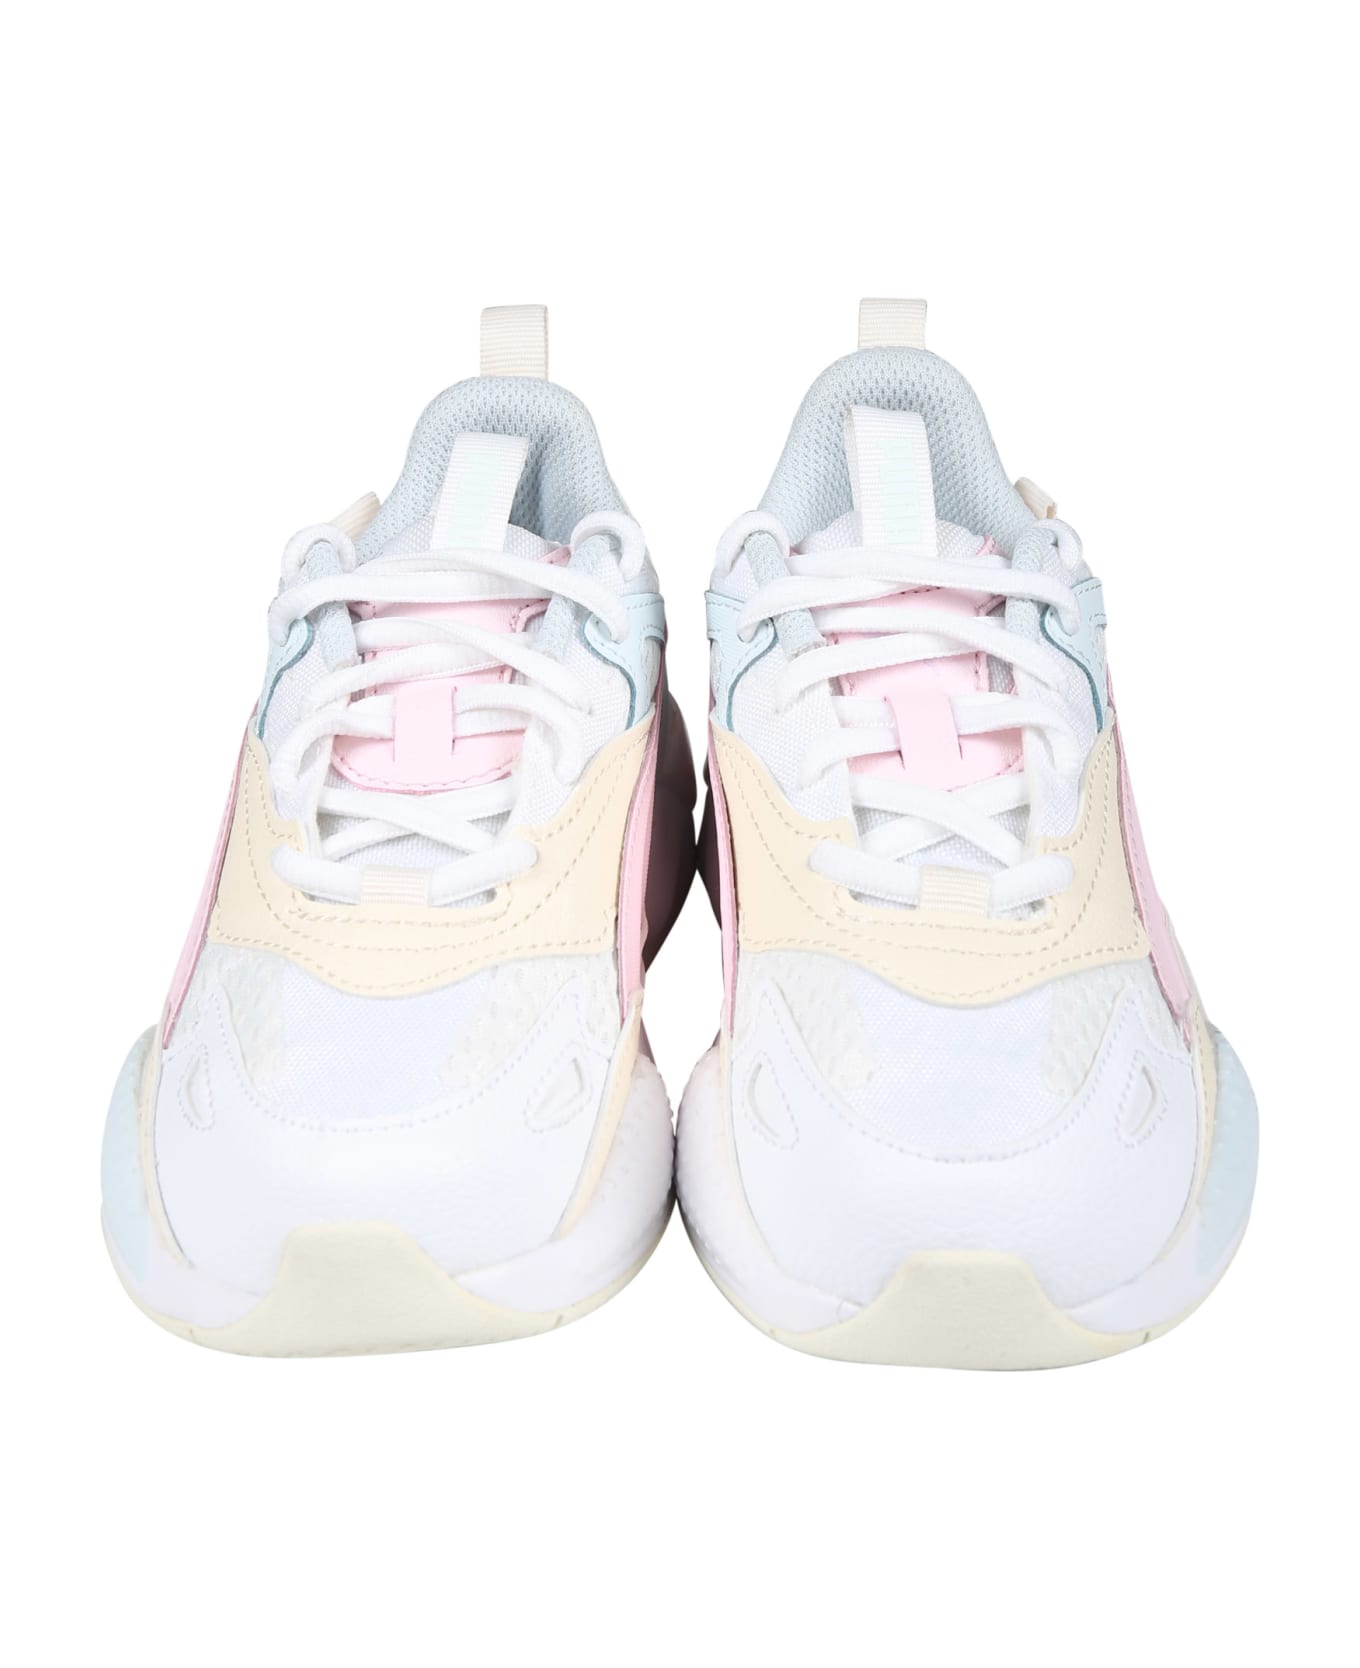 Puma Palermo Lth White Low Sneakers For Girl - White